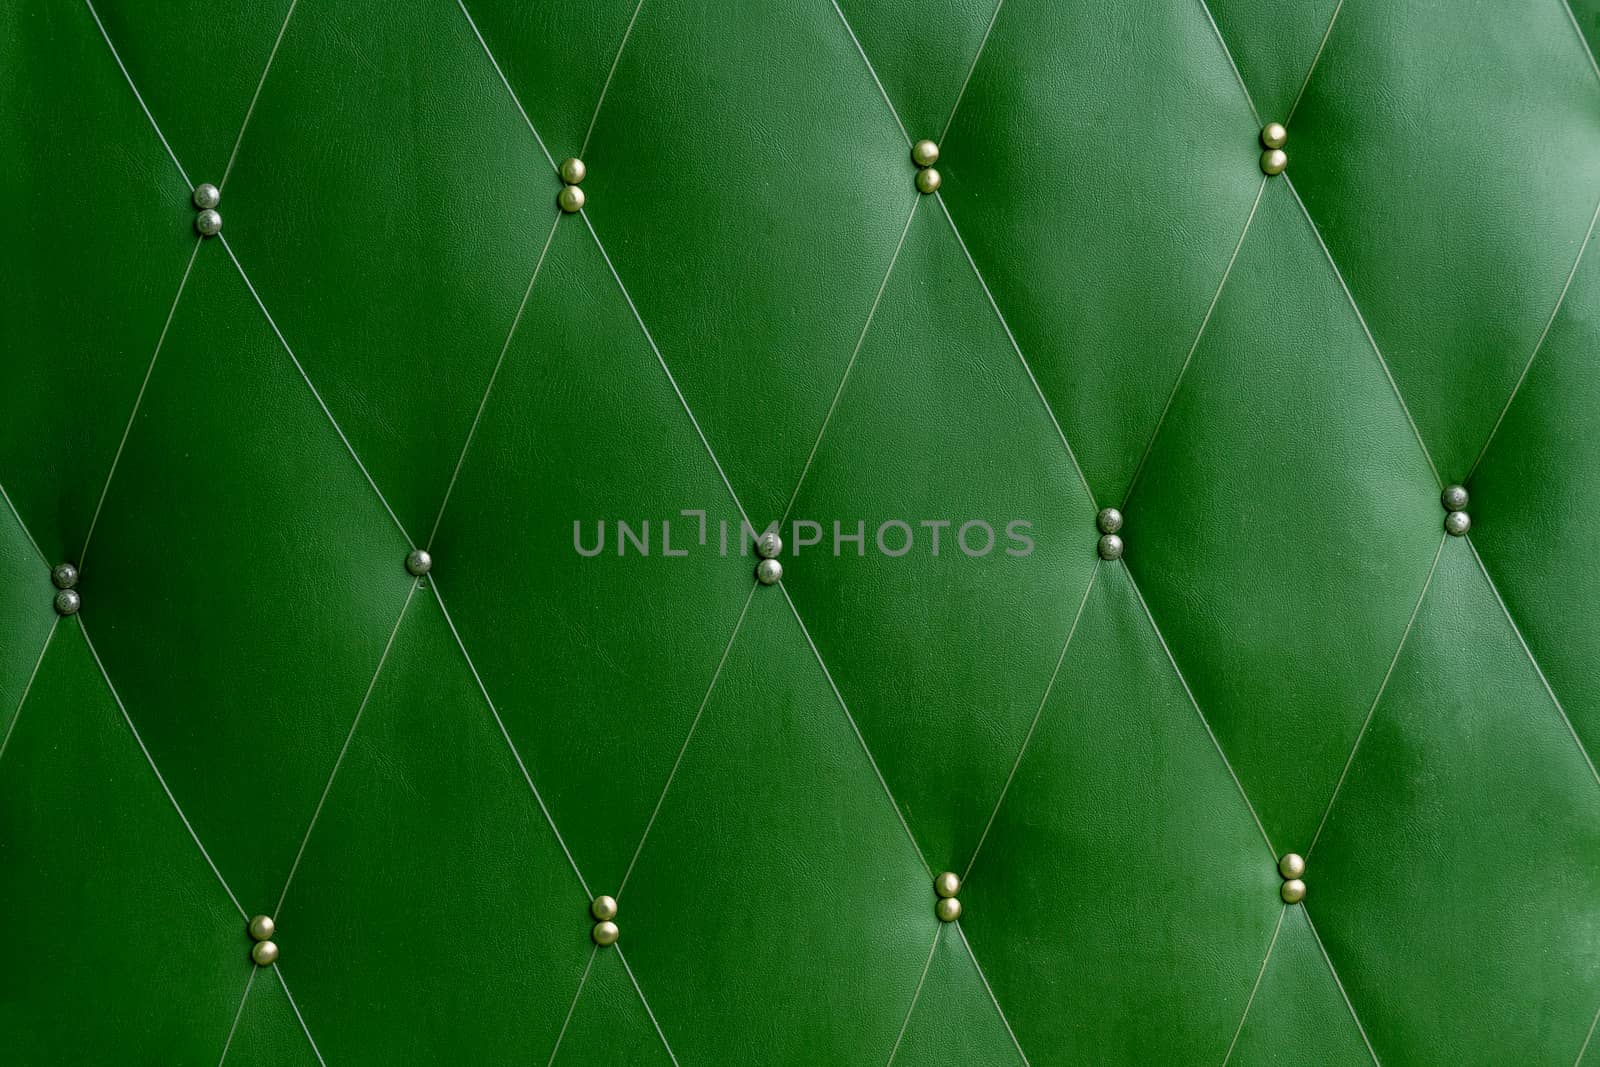 Soviet soft green dermantine front door with a banner of fishing line and nails - full frame background and texture.